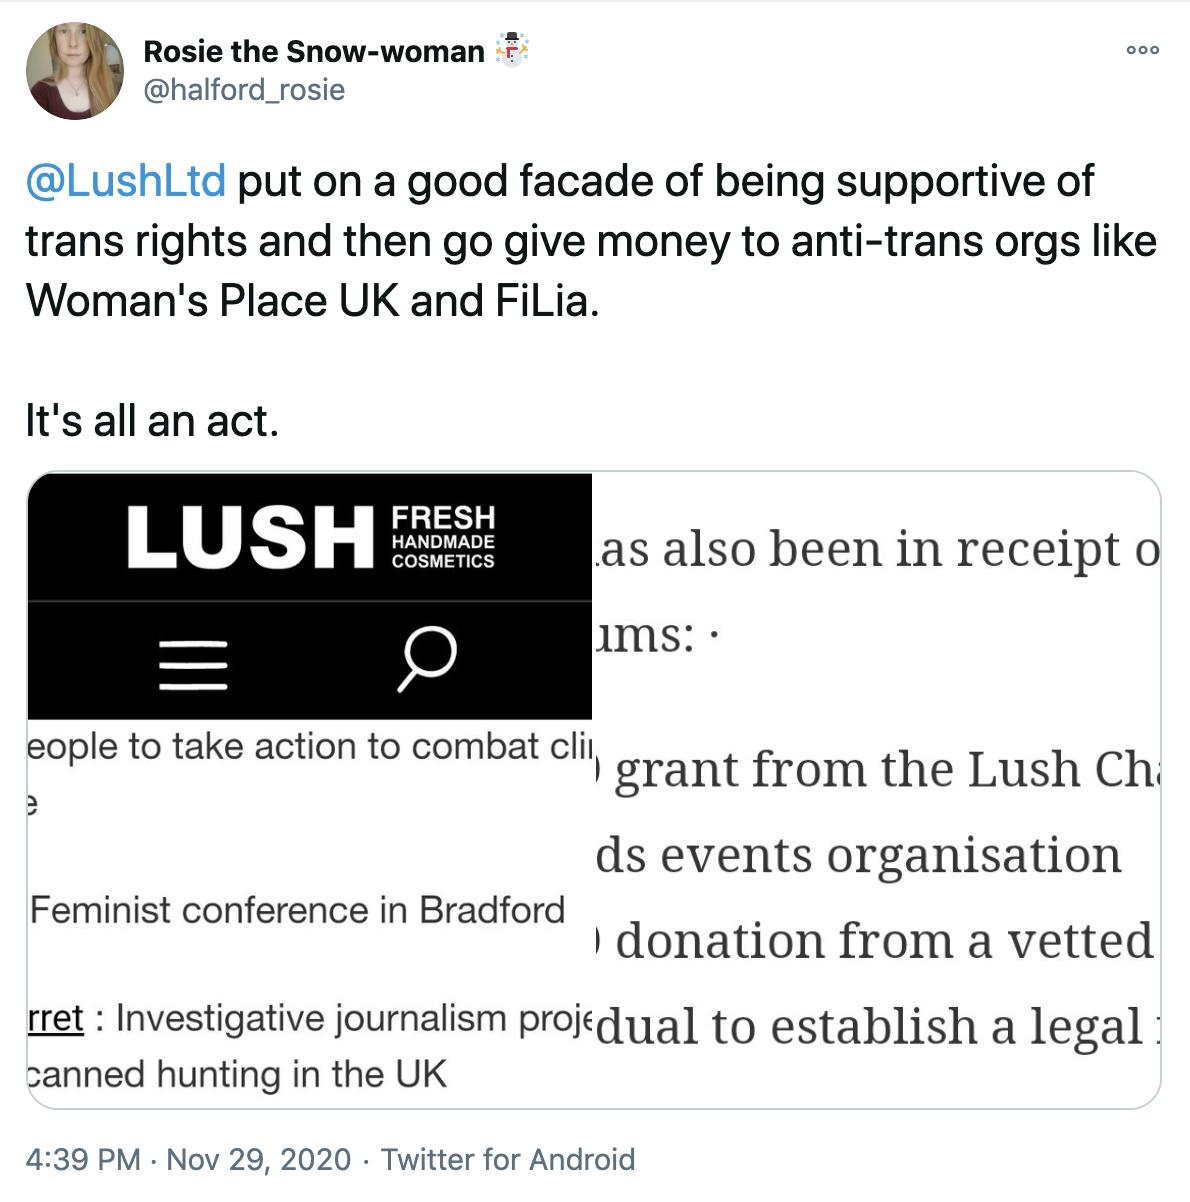 '@LushLtd put on a good facade of being supportive of trans rights and then go give money to anti-trans orgs like Woman's Place UK and FiLia. It's all an act.' screenshots of pages showing Lush has donated to FiLiA and WPUK